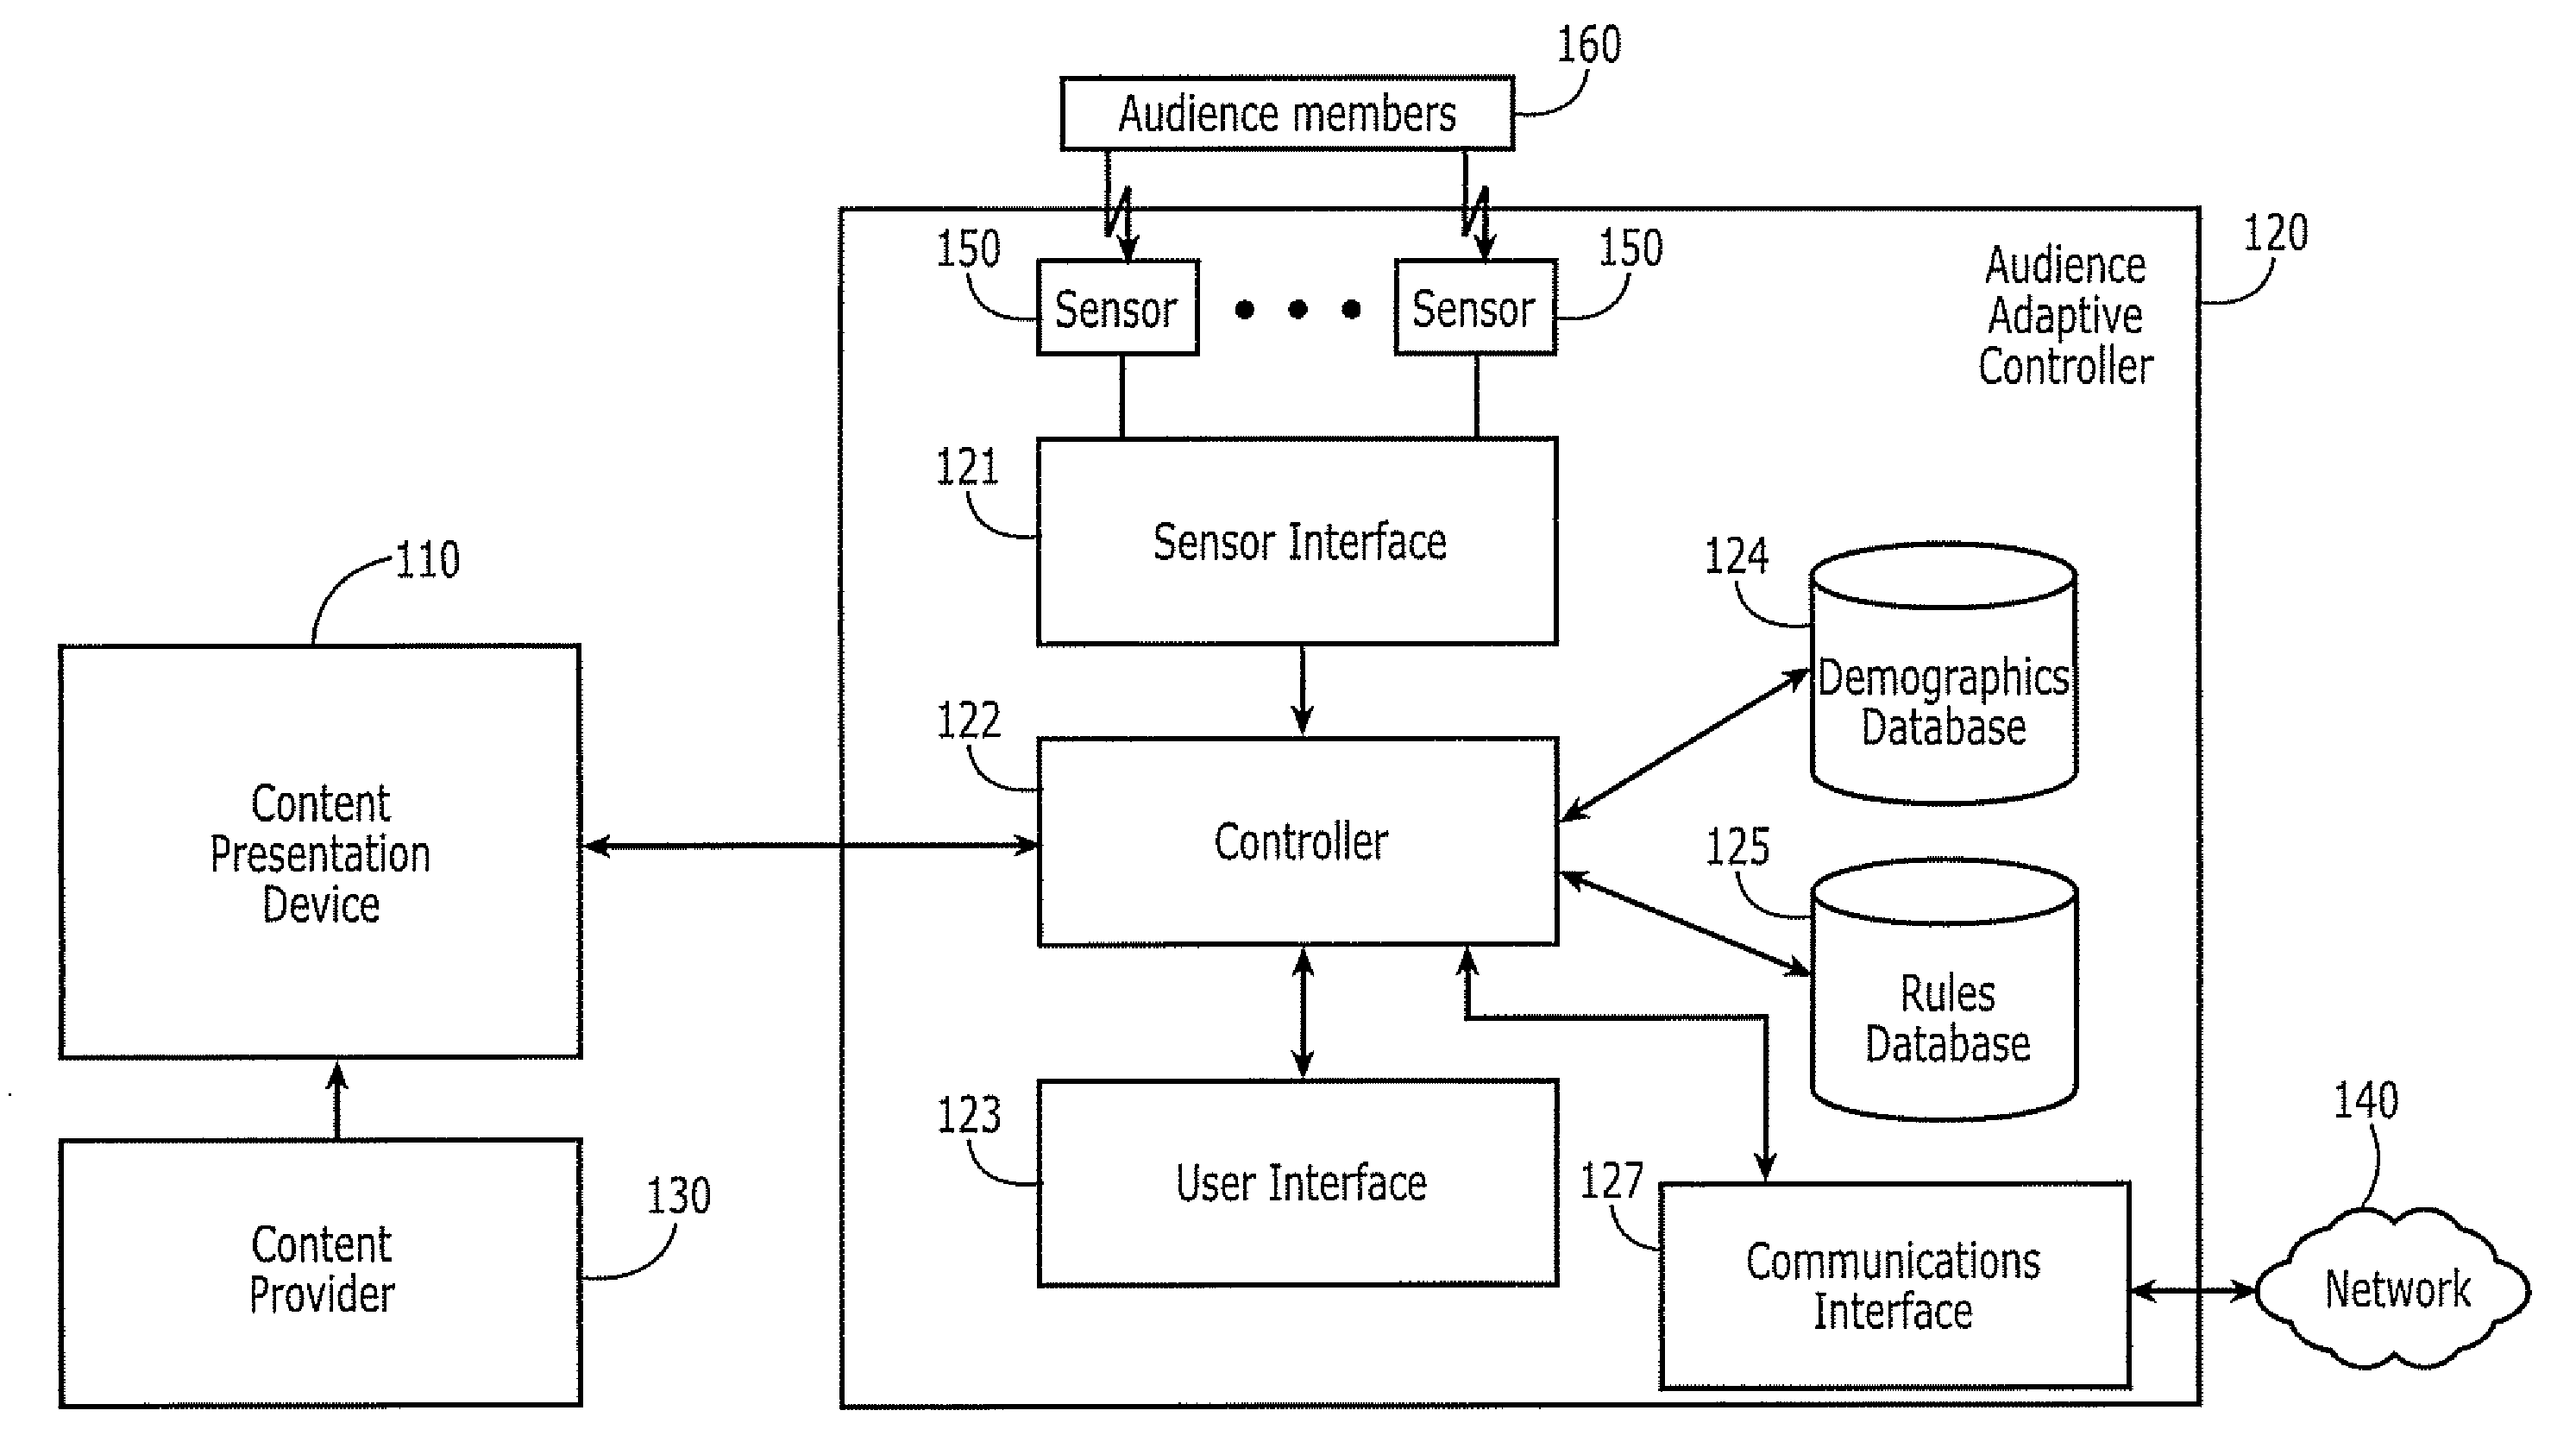 Methods, Apparatus and Computer Program Products for Audience-Adaptive Control of Content Presentation Based on Sensed Audience Demographics